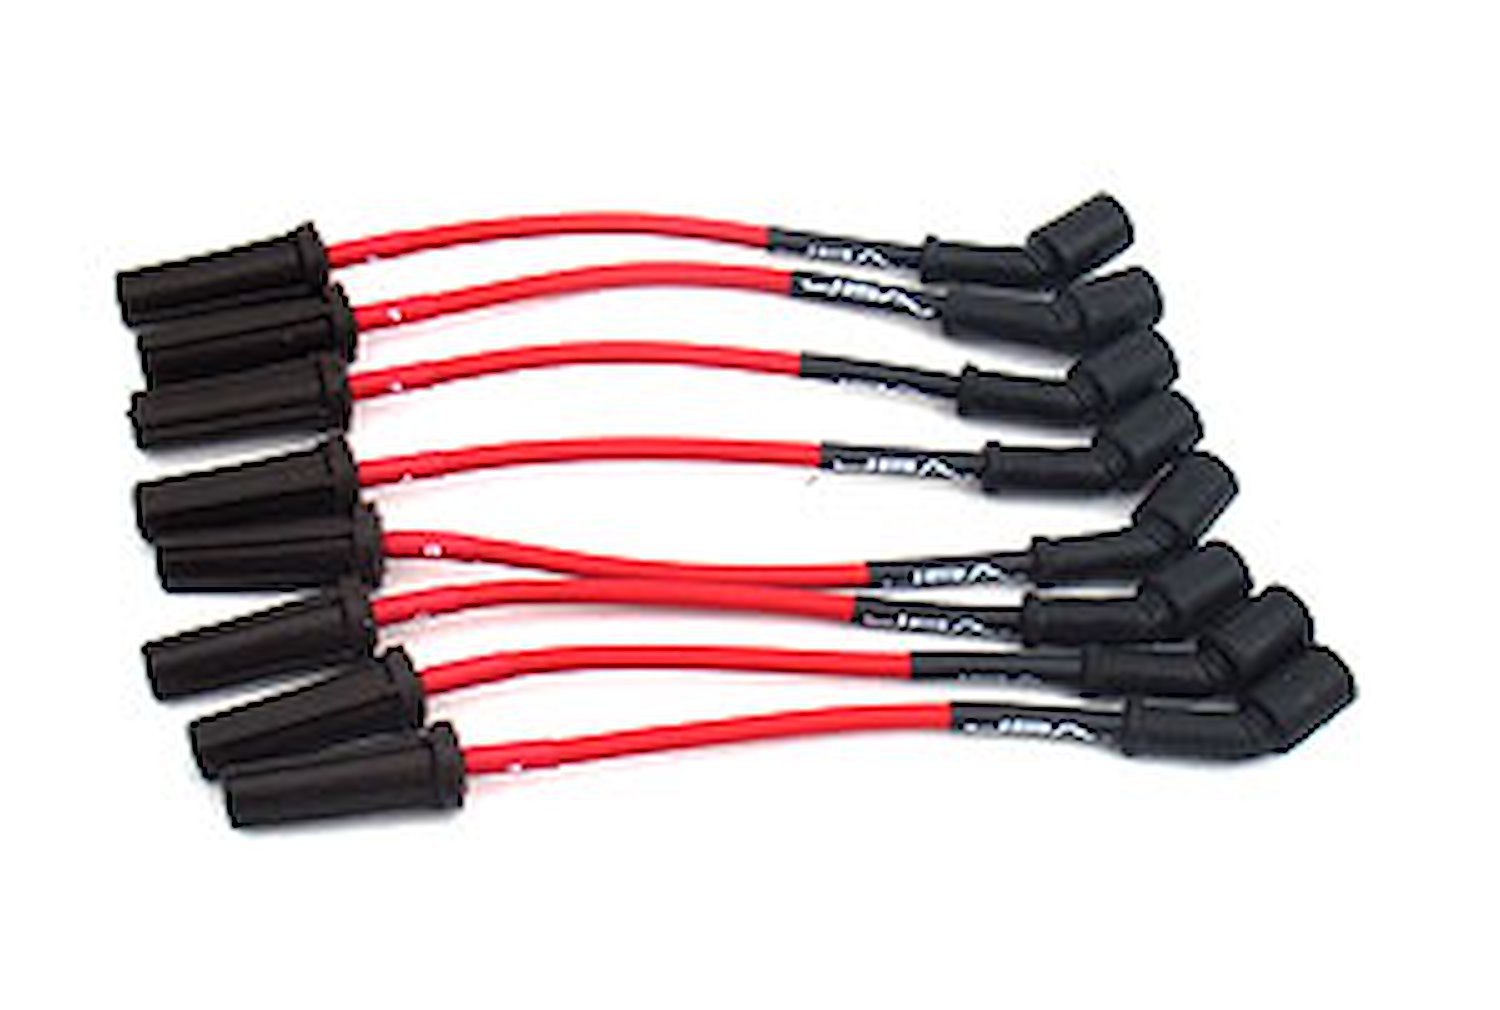 PowerCable Spark Plug Wires 2002-06 Escalade 5.3/6.0L